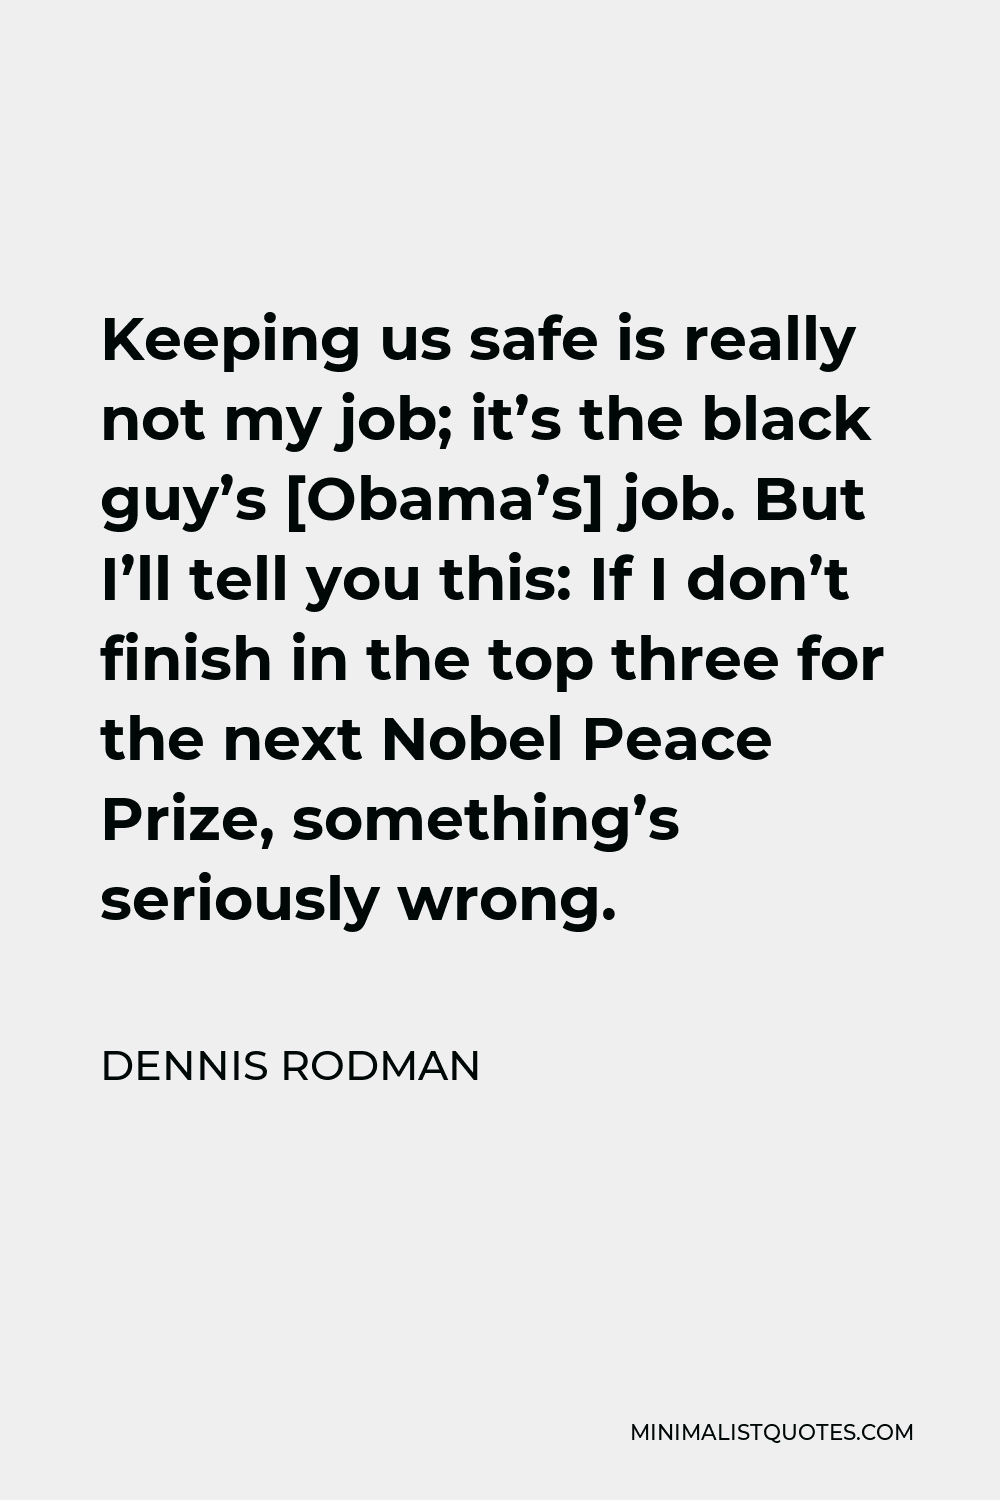 Dennis Rodman Quote - Keeping us safe is really not my job; it’s the black guy’s [Obama’s] job. But I’ll tell you this: If I don’t finish in the top three for the next Nobel Peace Prize, something’s seriously wrong.